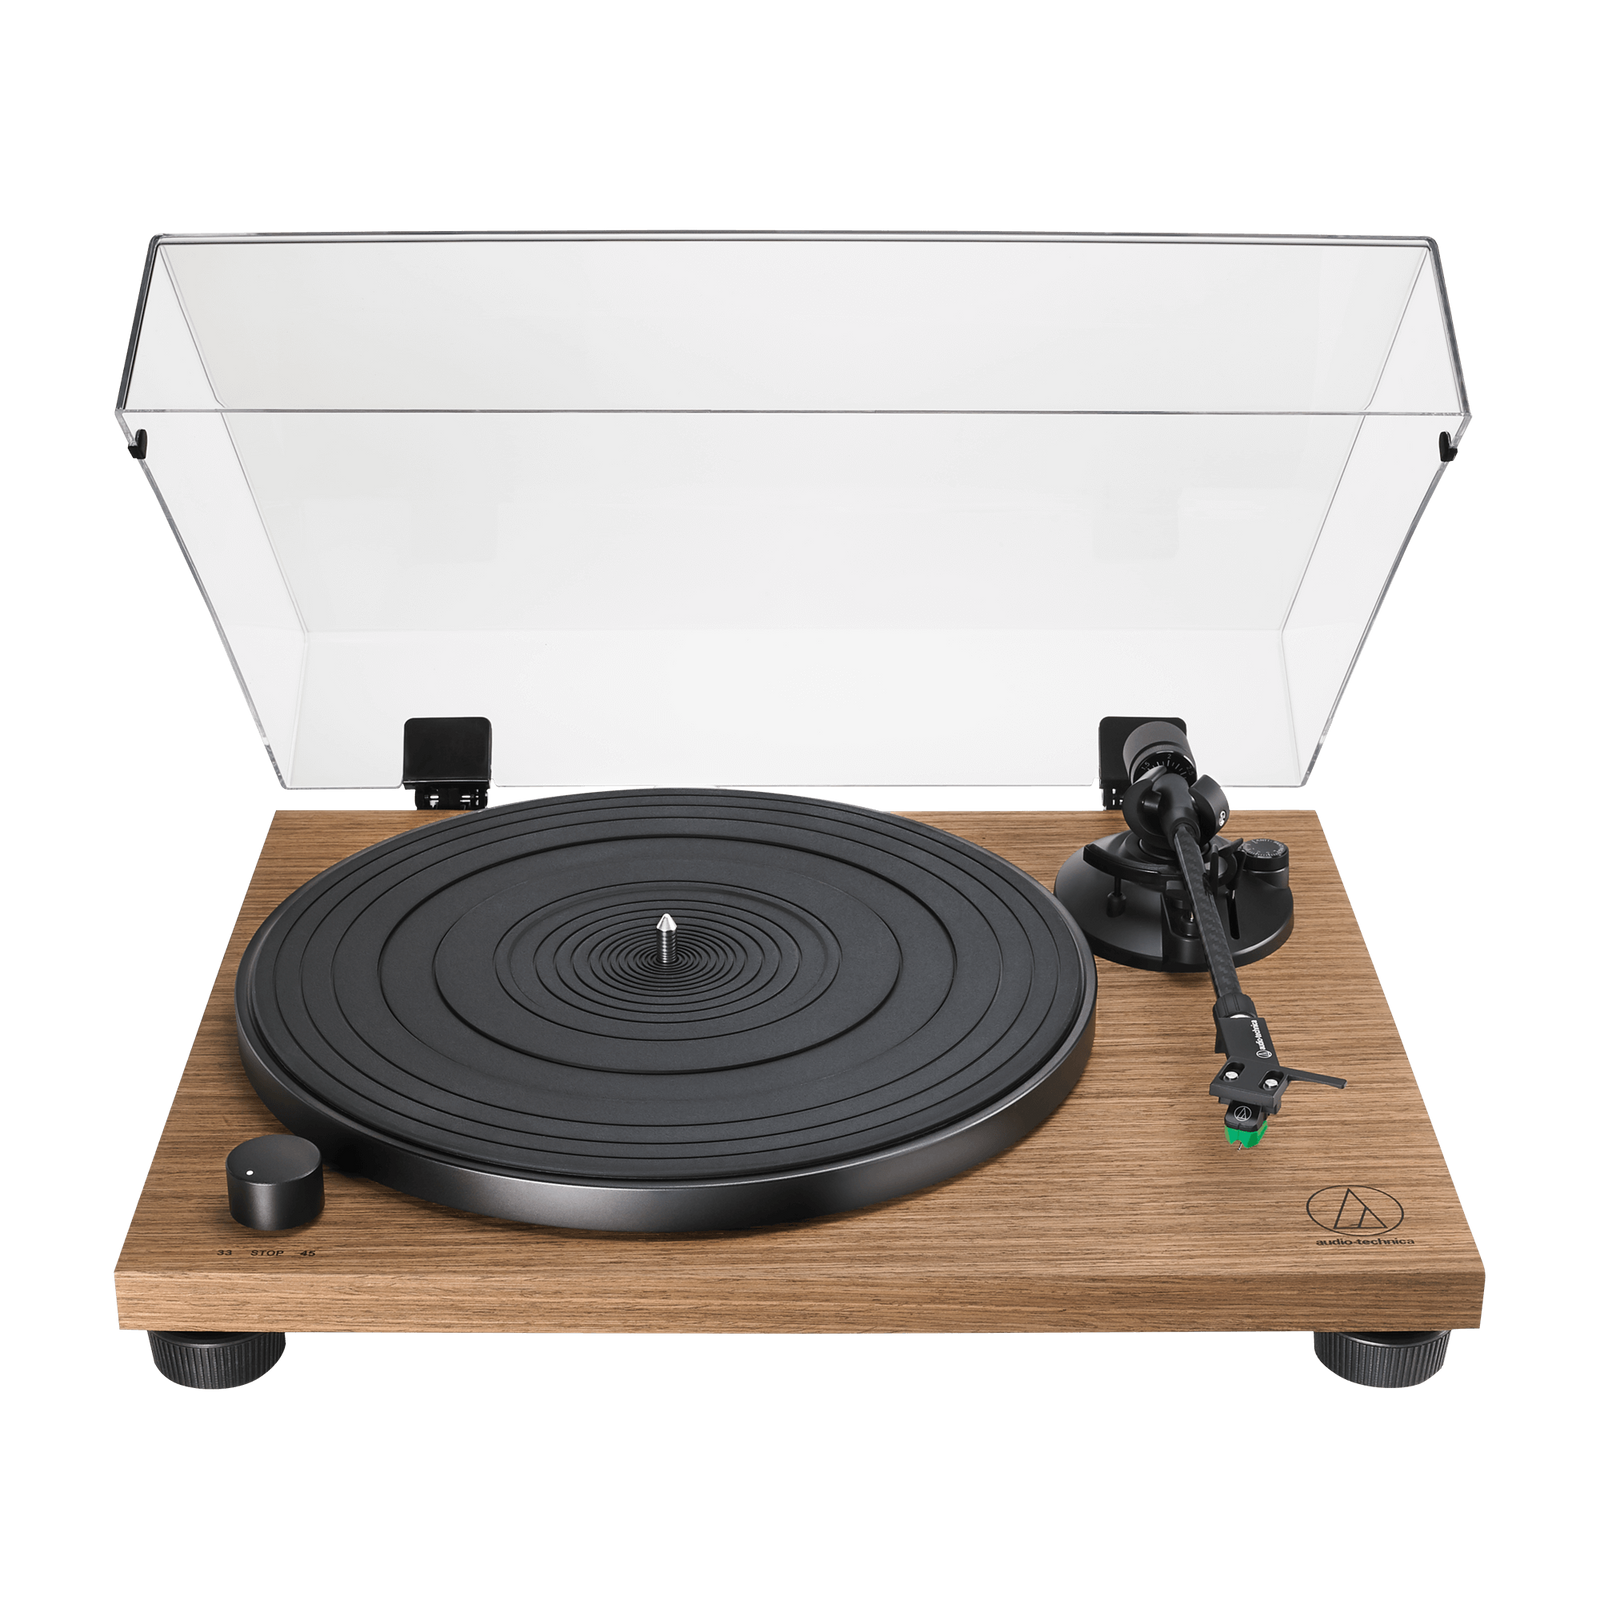 The AT-LPW40WN is a fully manual, belt-drive turntable designed to give you optimal high-fidelity audio reproduction from vinyl. The turntable includes a straight carbon-fiber tonearm with adjustable tracking force and an AT-HS4 universal ½"-mount headshell with an AT-VM95E Dual Moving Magnet phono cartridge. 